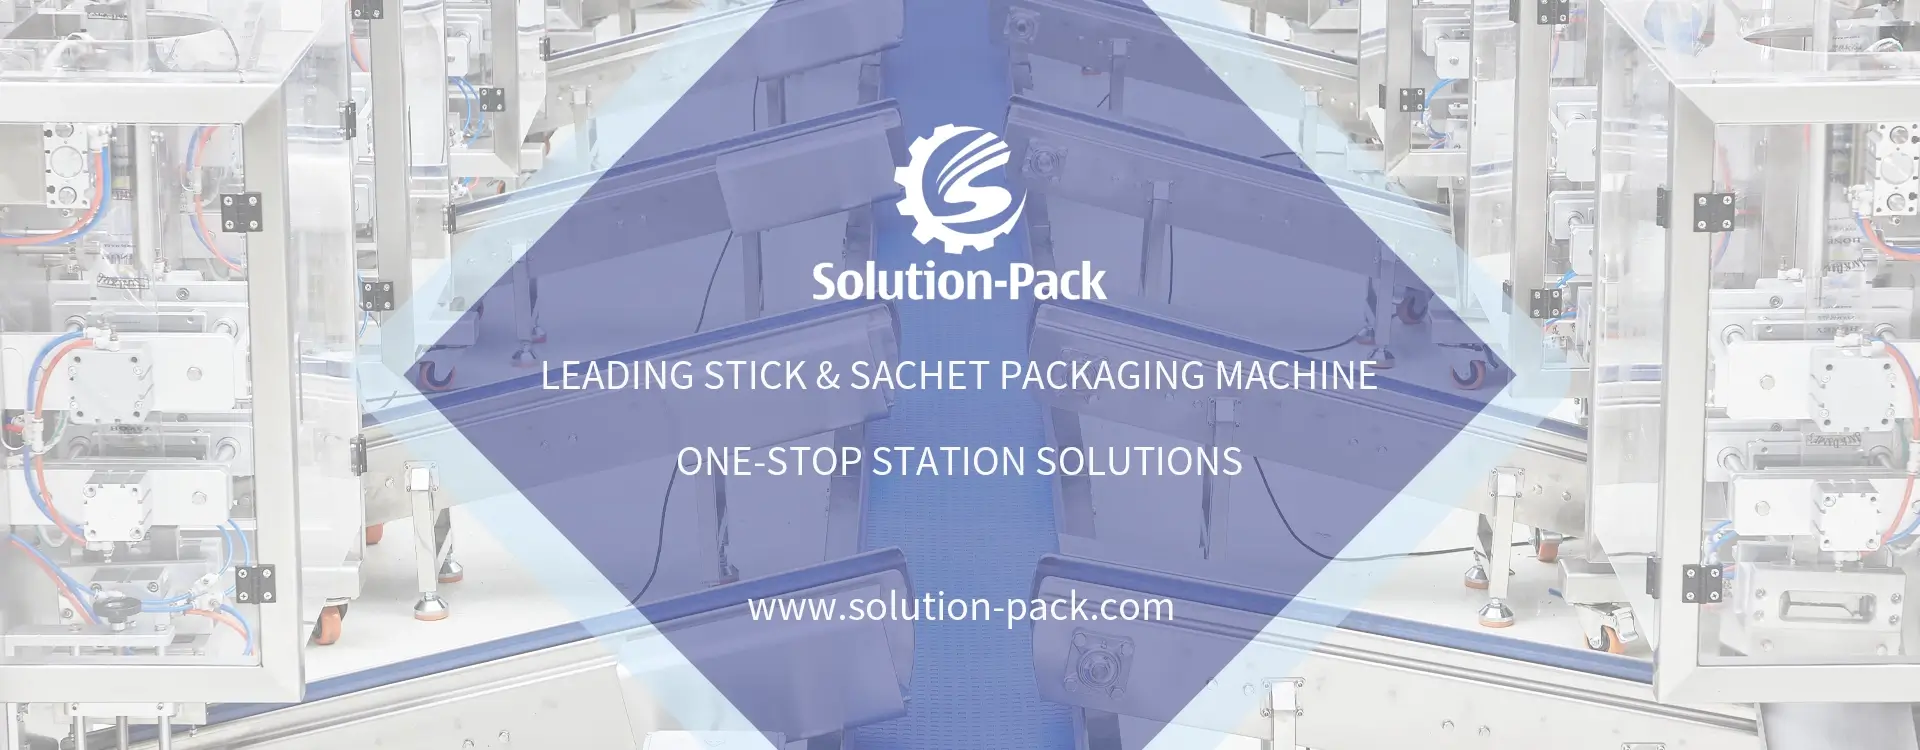 Automatic Premium Sachet Packaging Machine Equipment Bottom Banner Picture | Solution-Pack